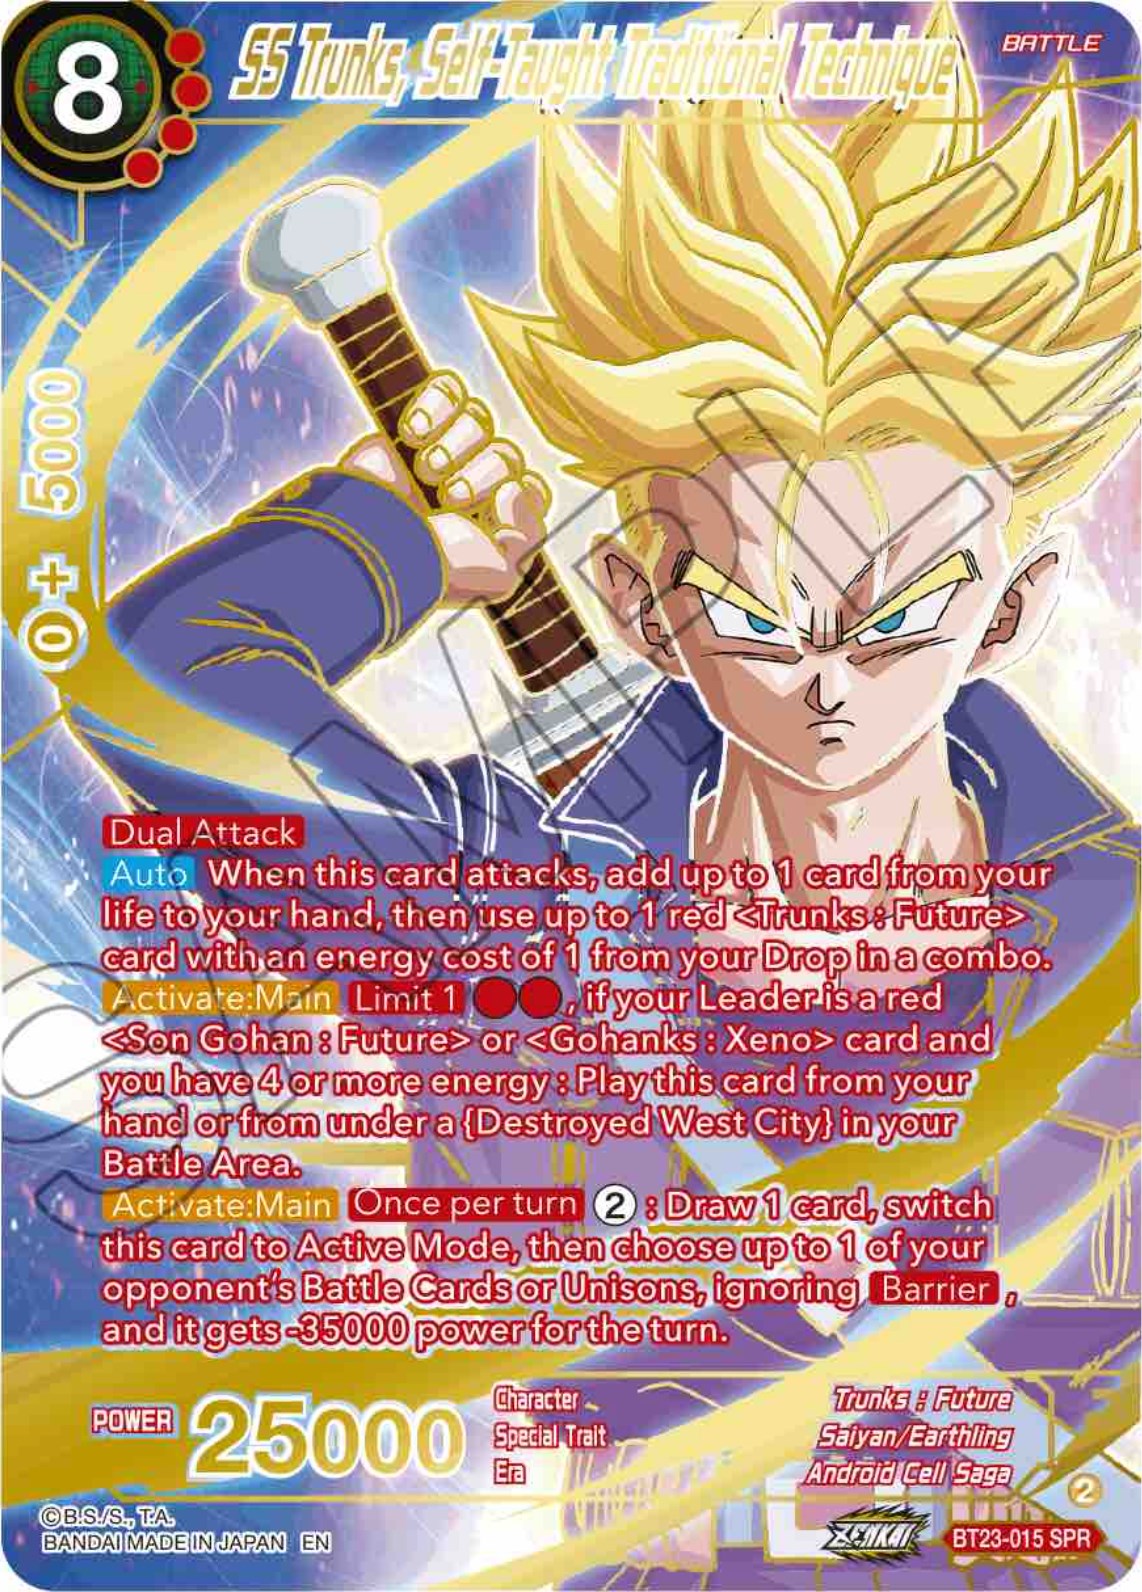 SS Trunks, Self-Taught Traditional Technique (SPR) (BT23-015) [Perfect Combination] | Devastation Store